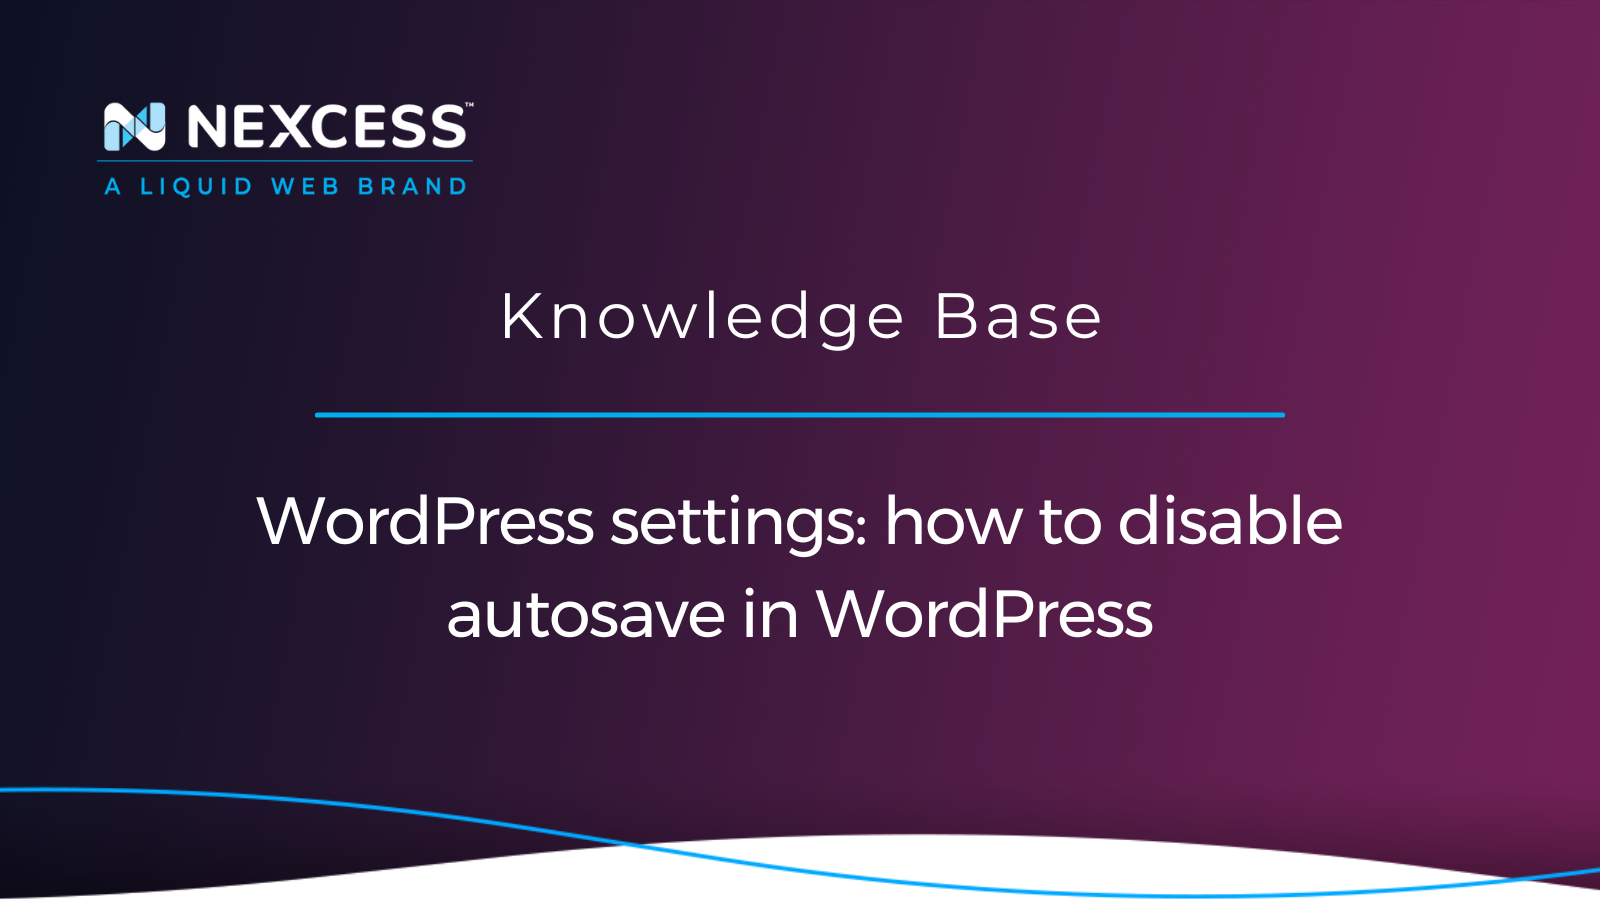 WordPress settings: how to disable autosave in WordPress